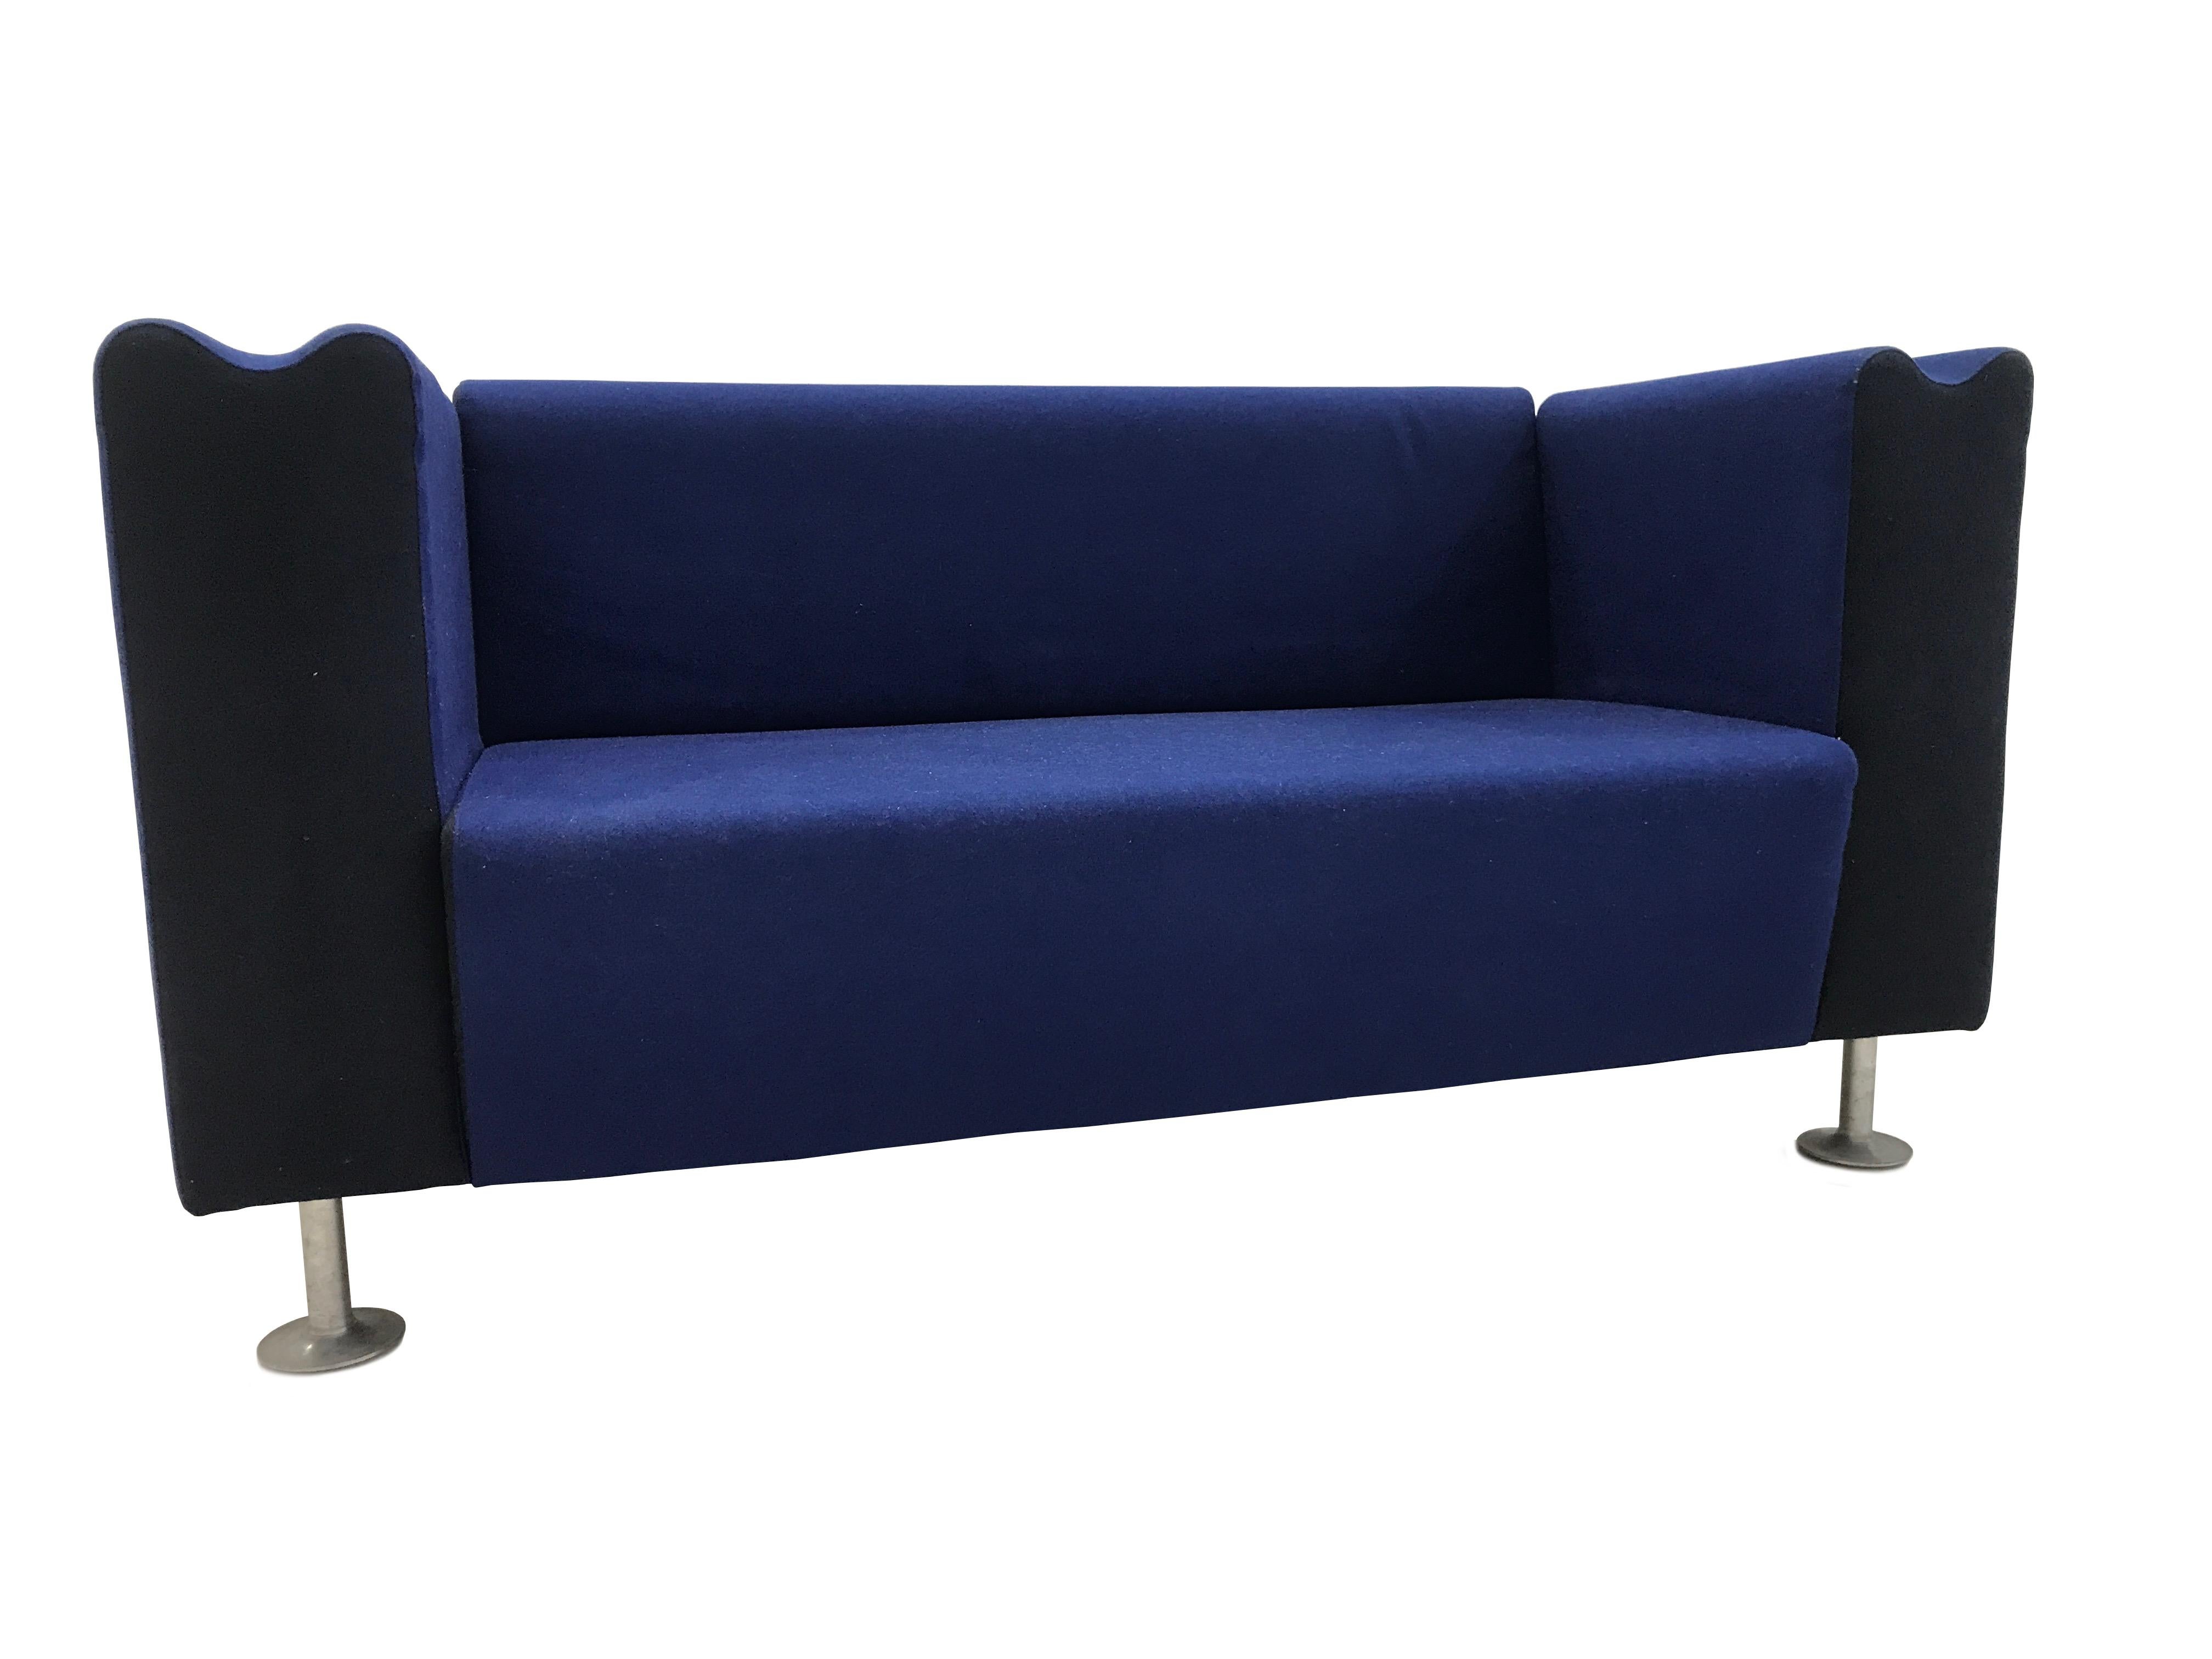 M Collection, Moroso by Ross Lovegrove, blue kvadrat wool with darker blue panels and aluminium feet. 

The sculpture detail of the 